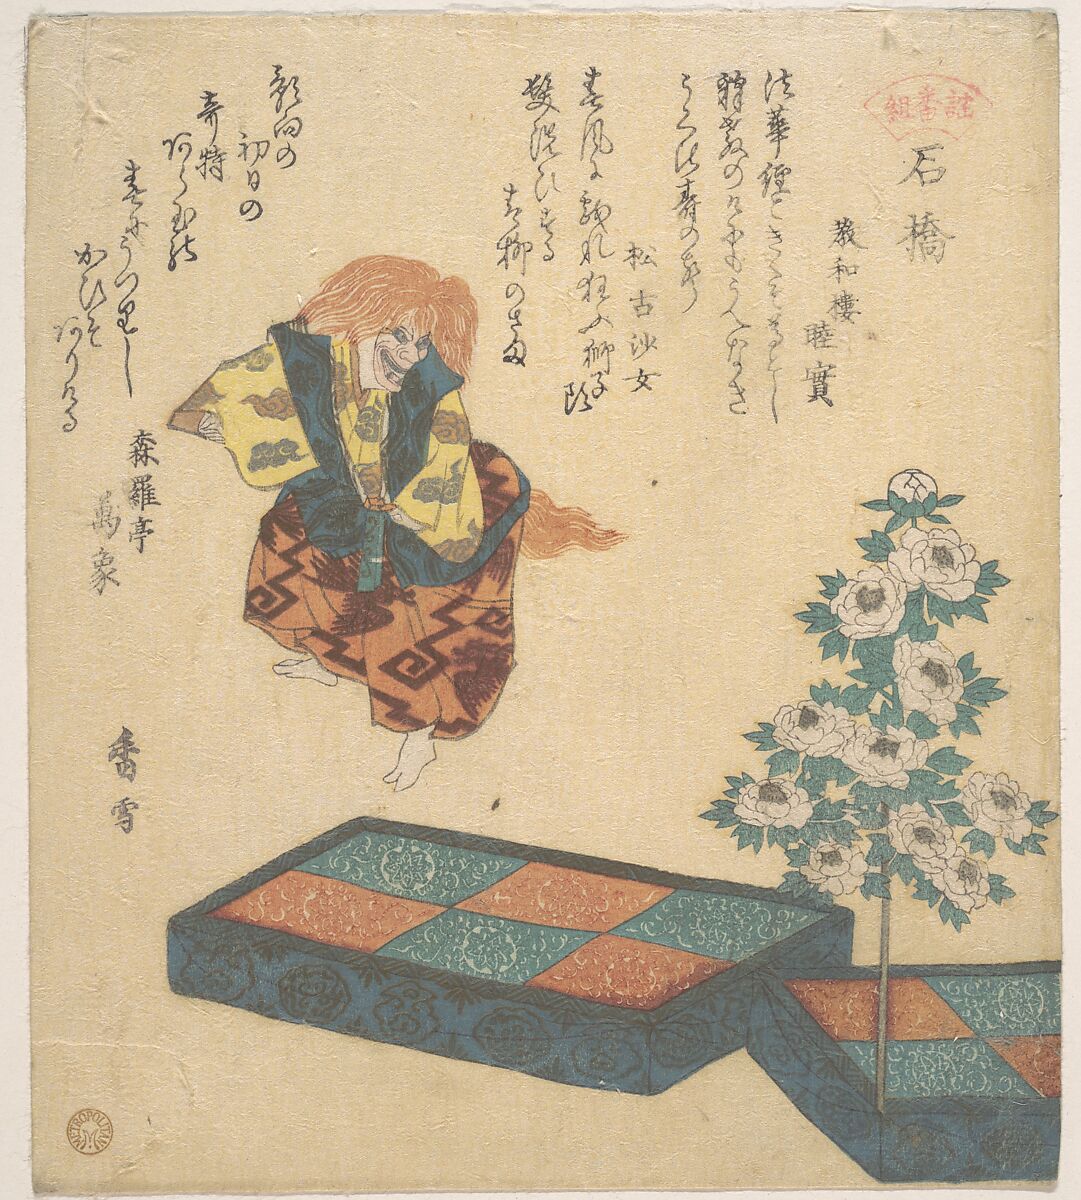 Scene from Noh Dance, Kosetsu (Japanese, active early 19th century) (?), Woodblock print (surimono); ink and color on paper, Japan 